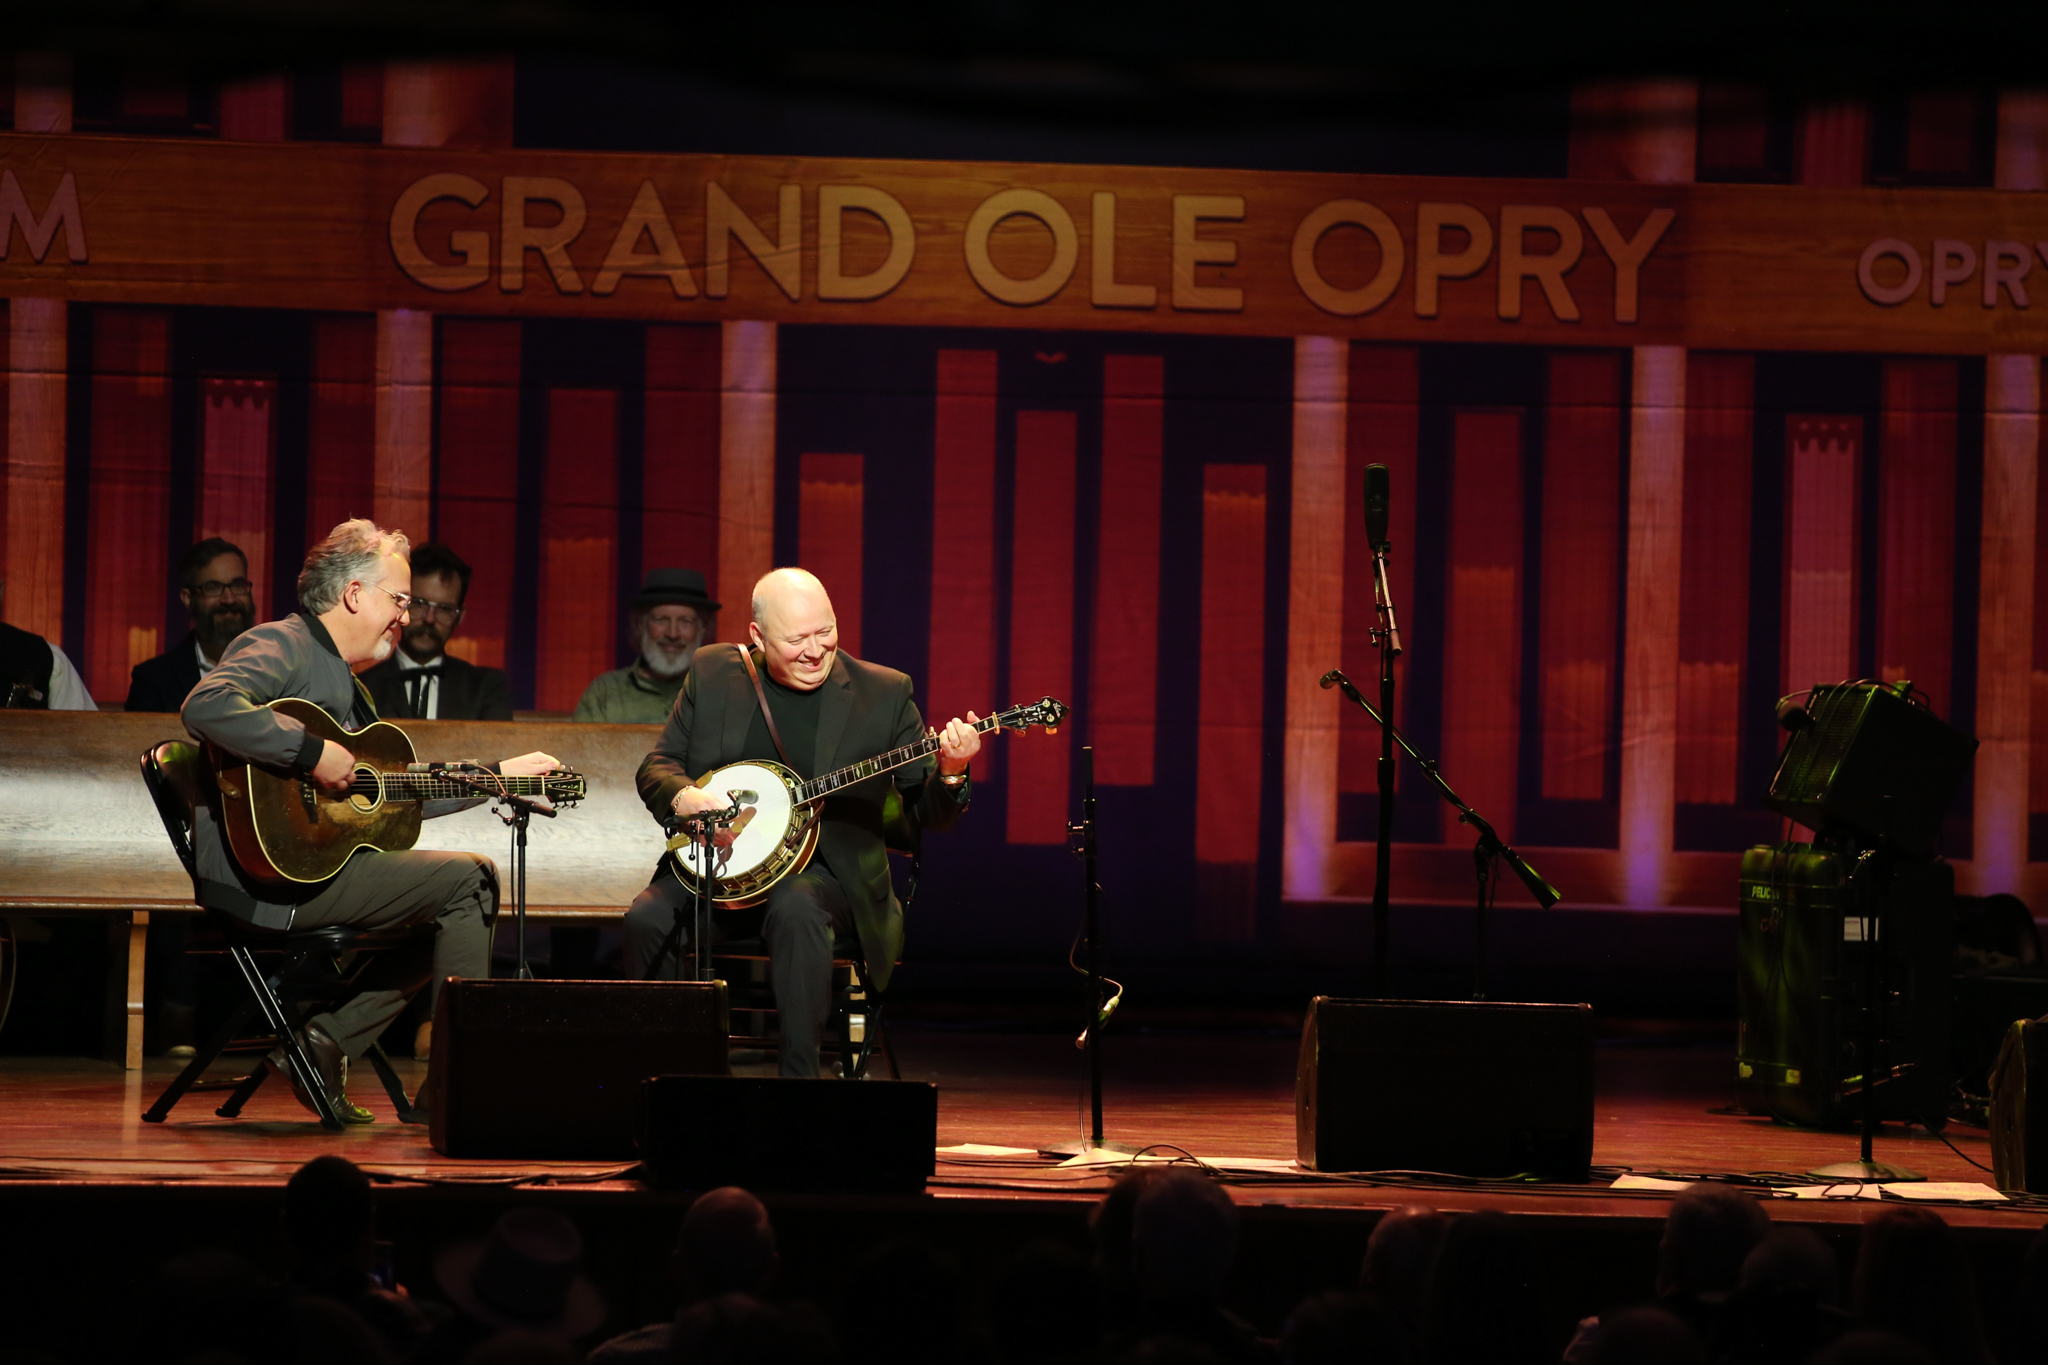 The Grand ole Opera is a long running music event in Nashville. 